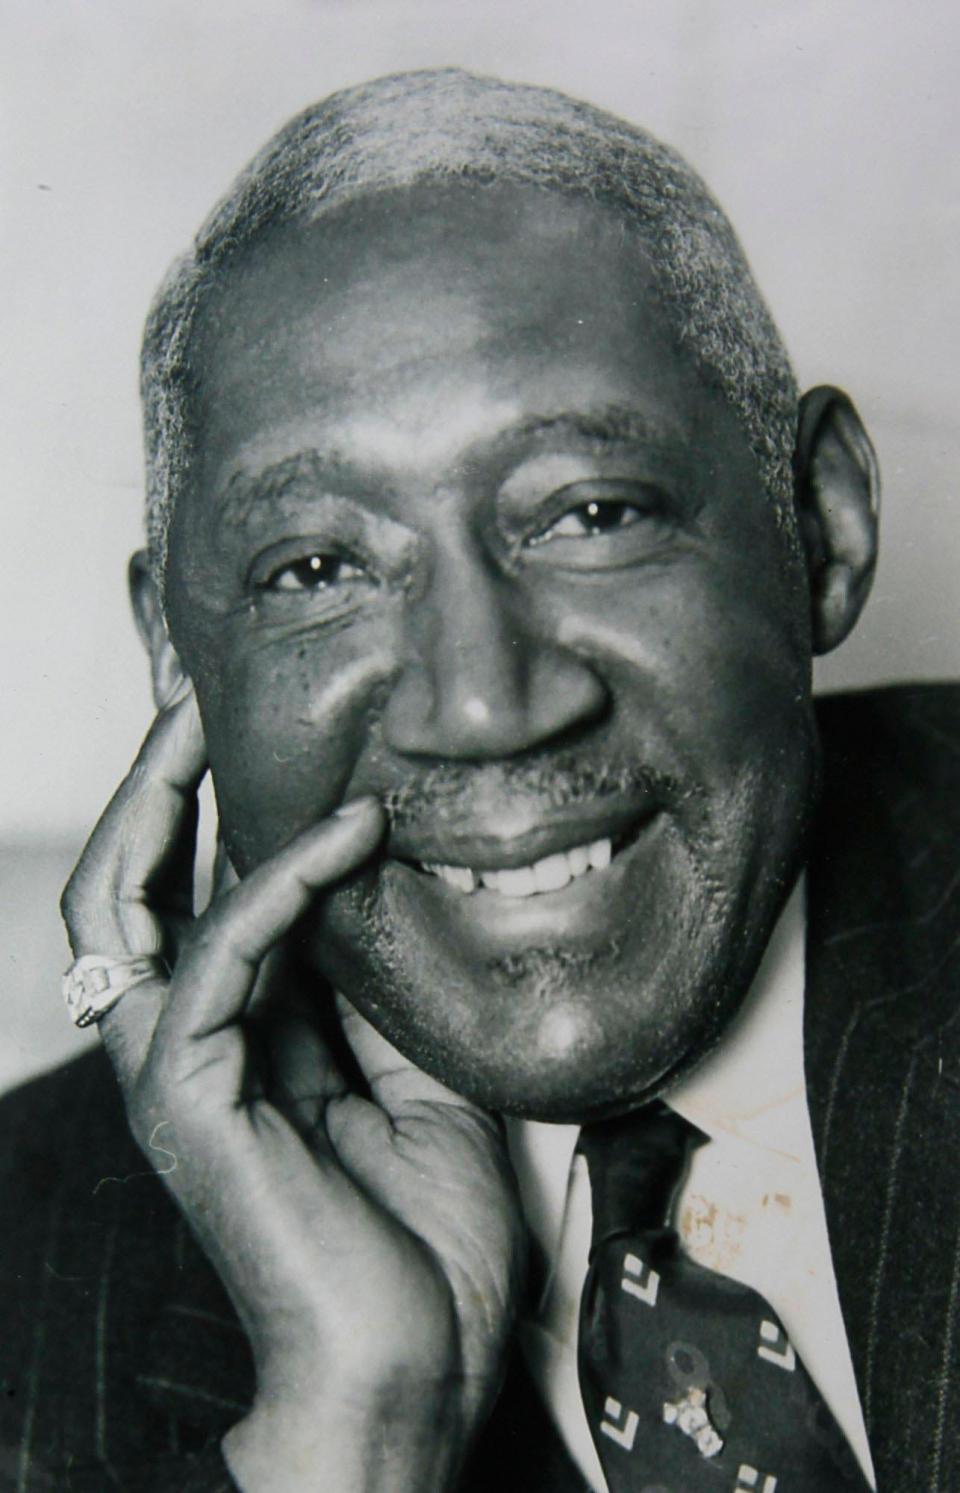 George Mathews, pictured in 1958, owned the Hotel Mathews on North Howard Street in Akron.